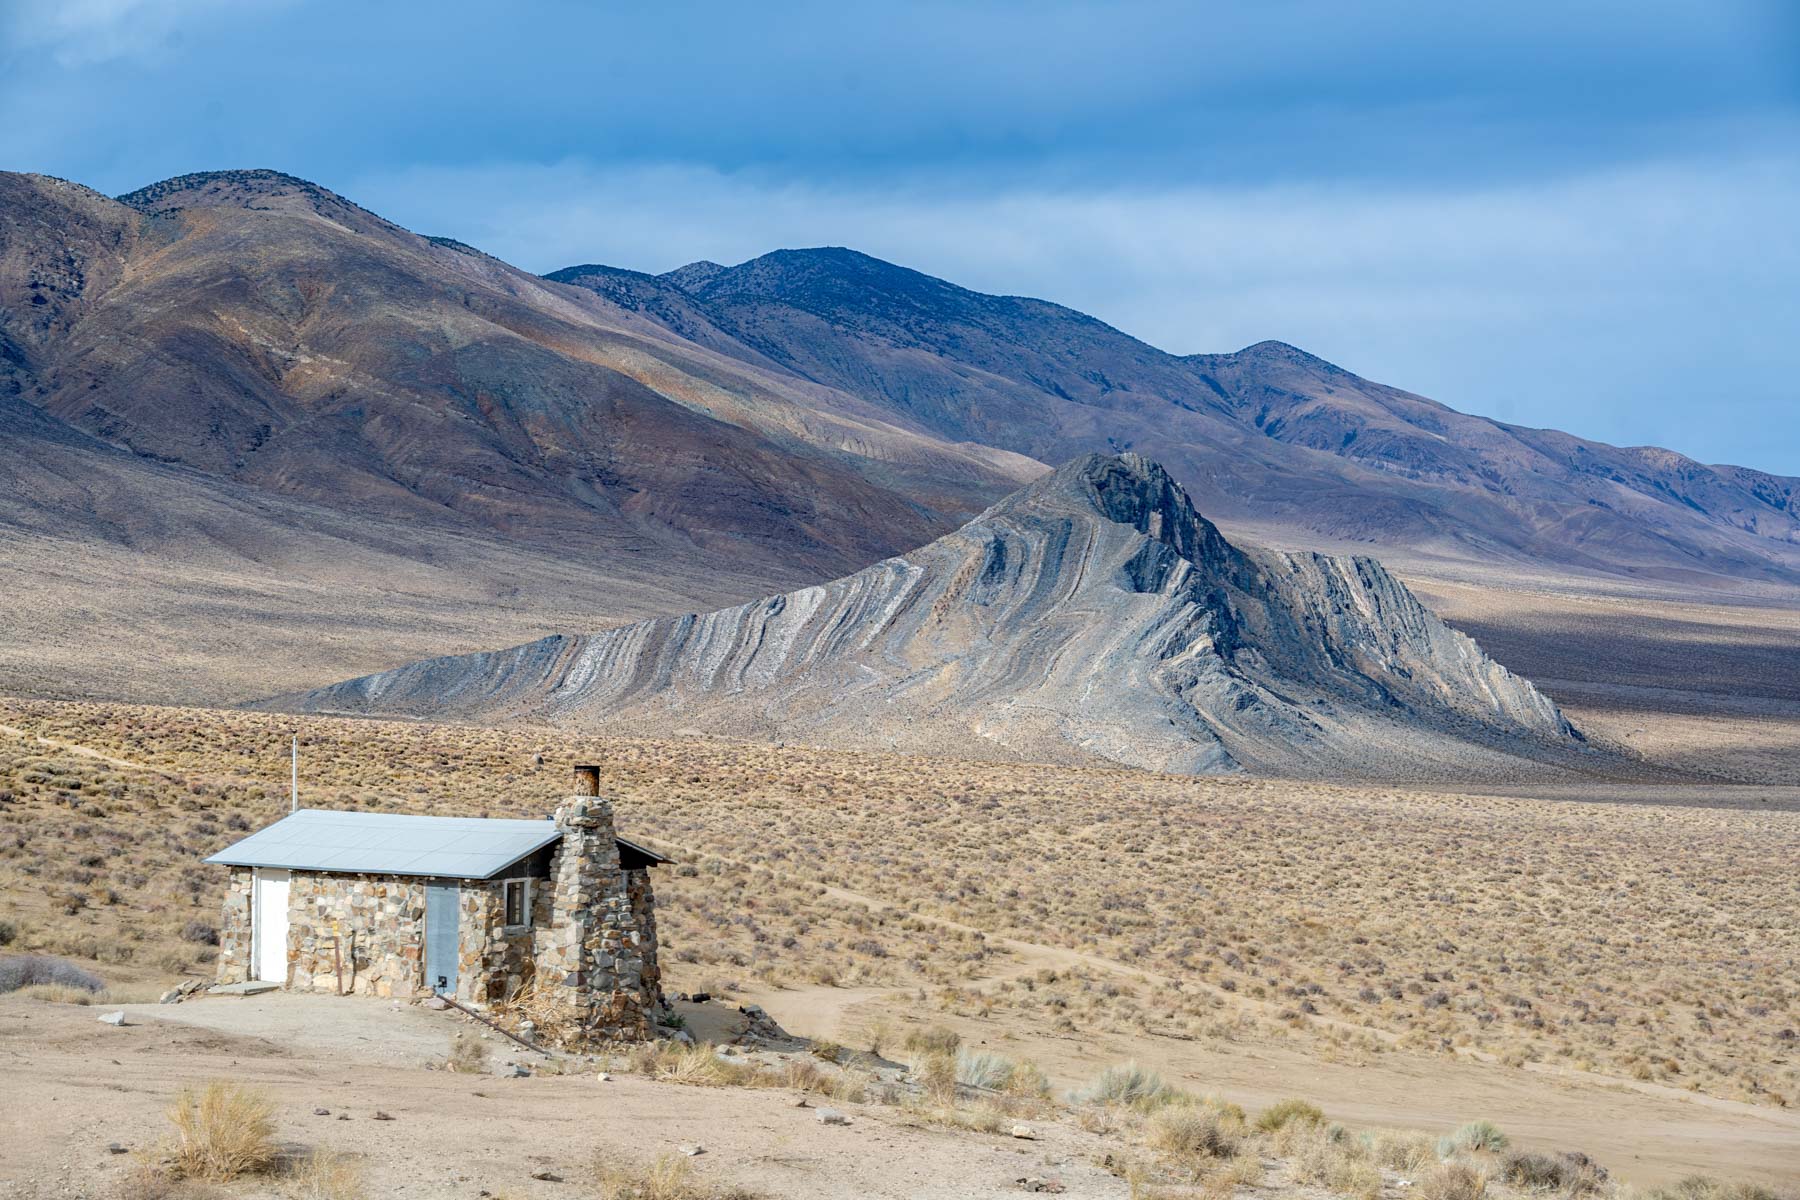 The Geologist's Cabin and Striped Butte in Death Valley National Park